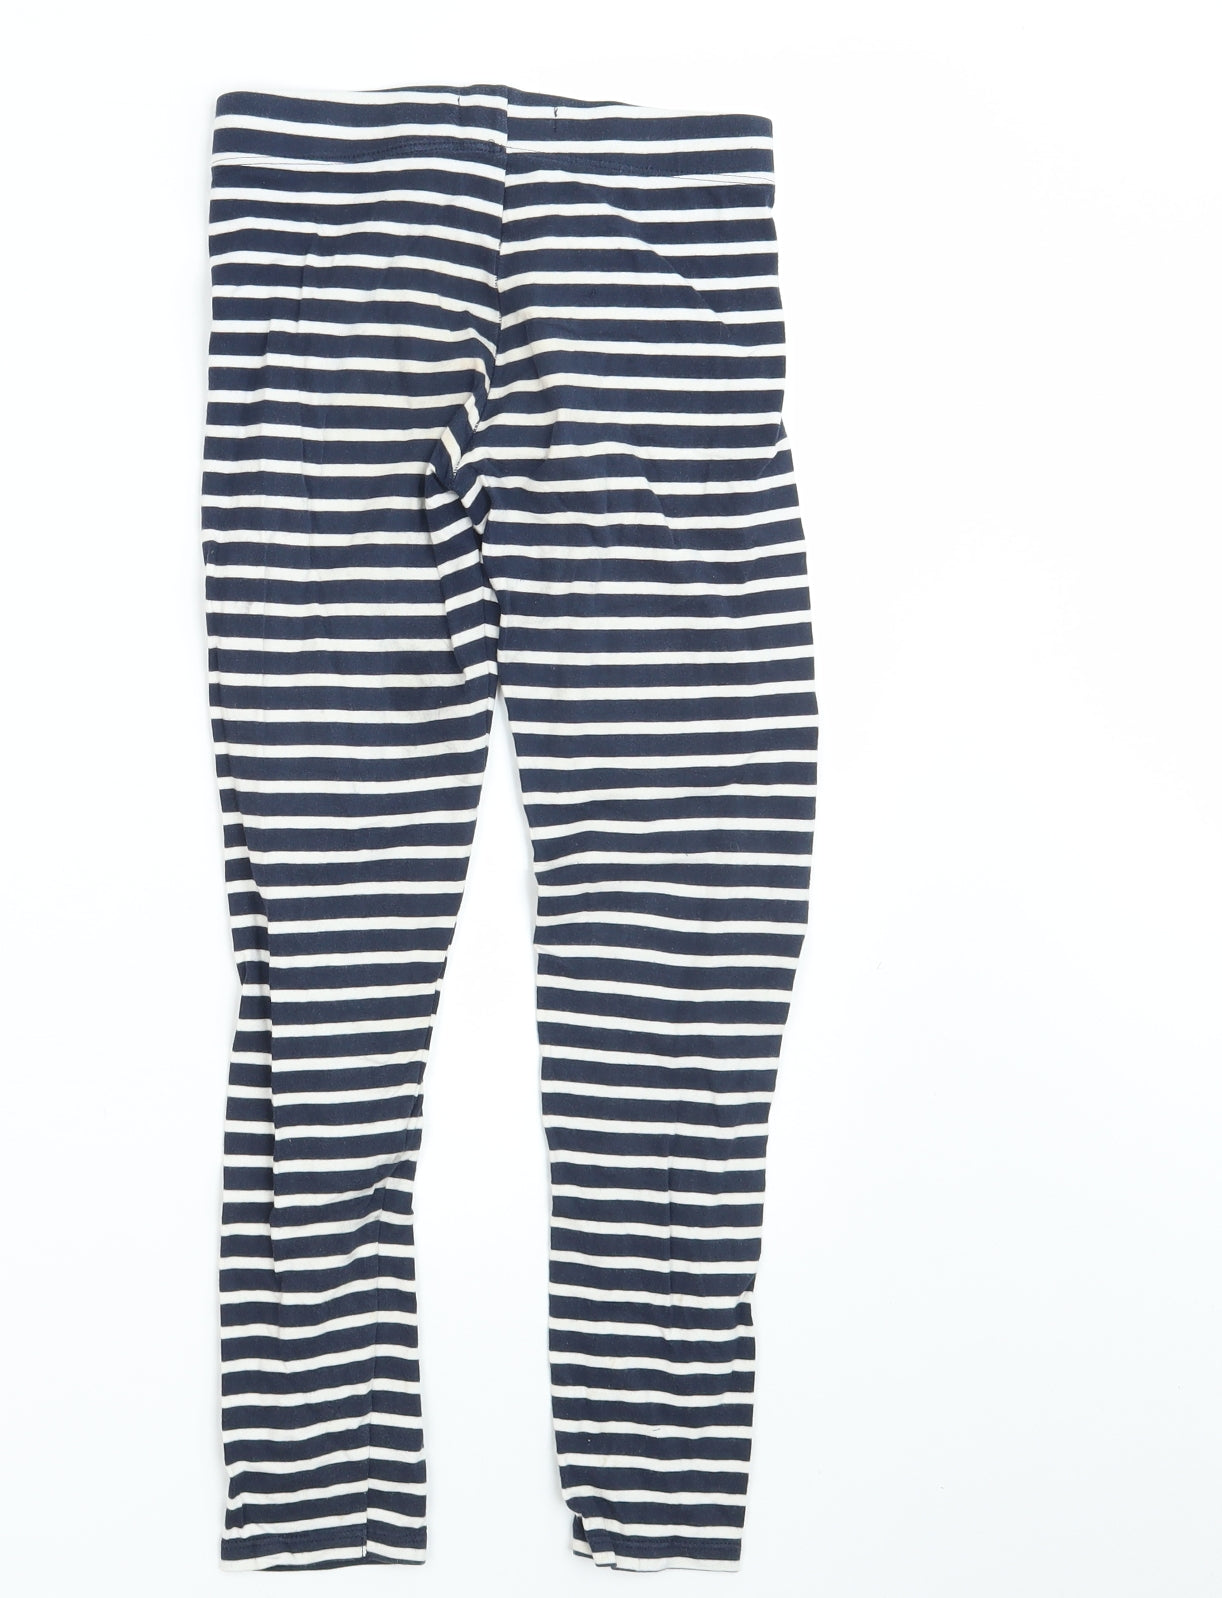 M&S Girls Blue Striped  Jegging Trousers Size 10-11 Years